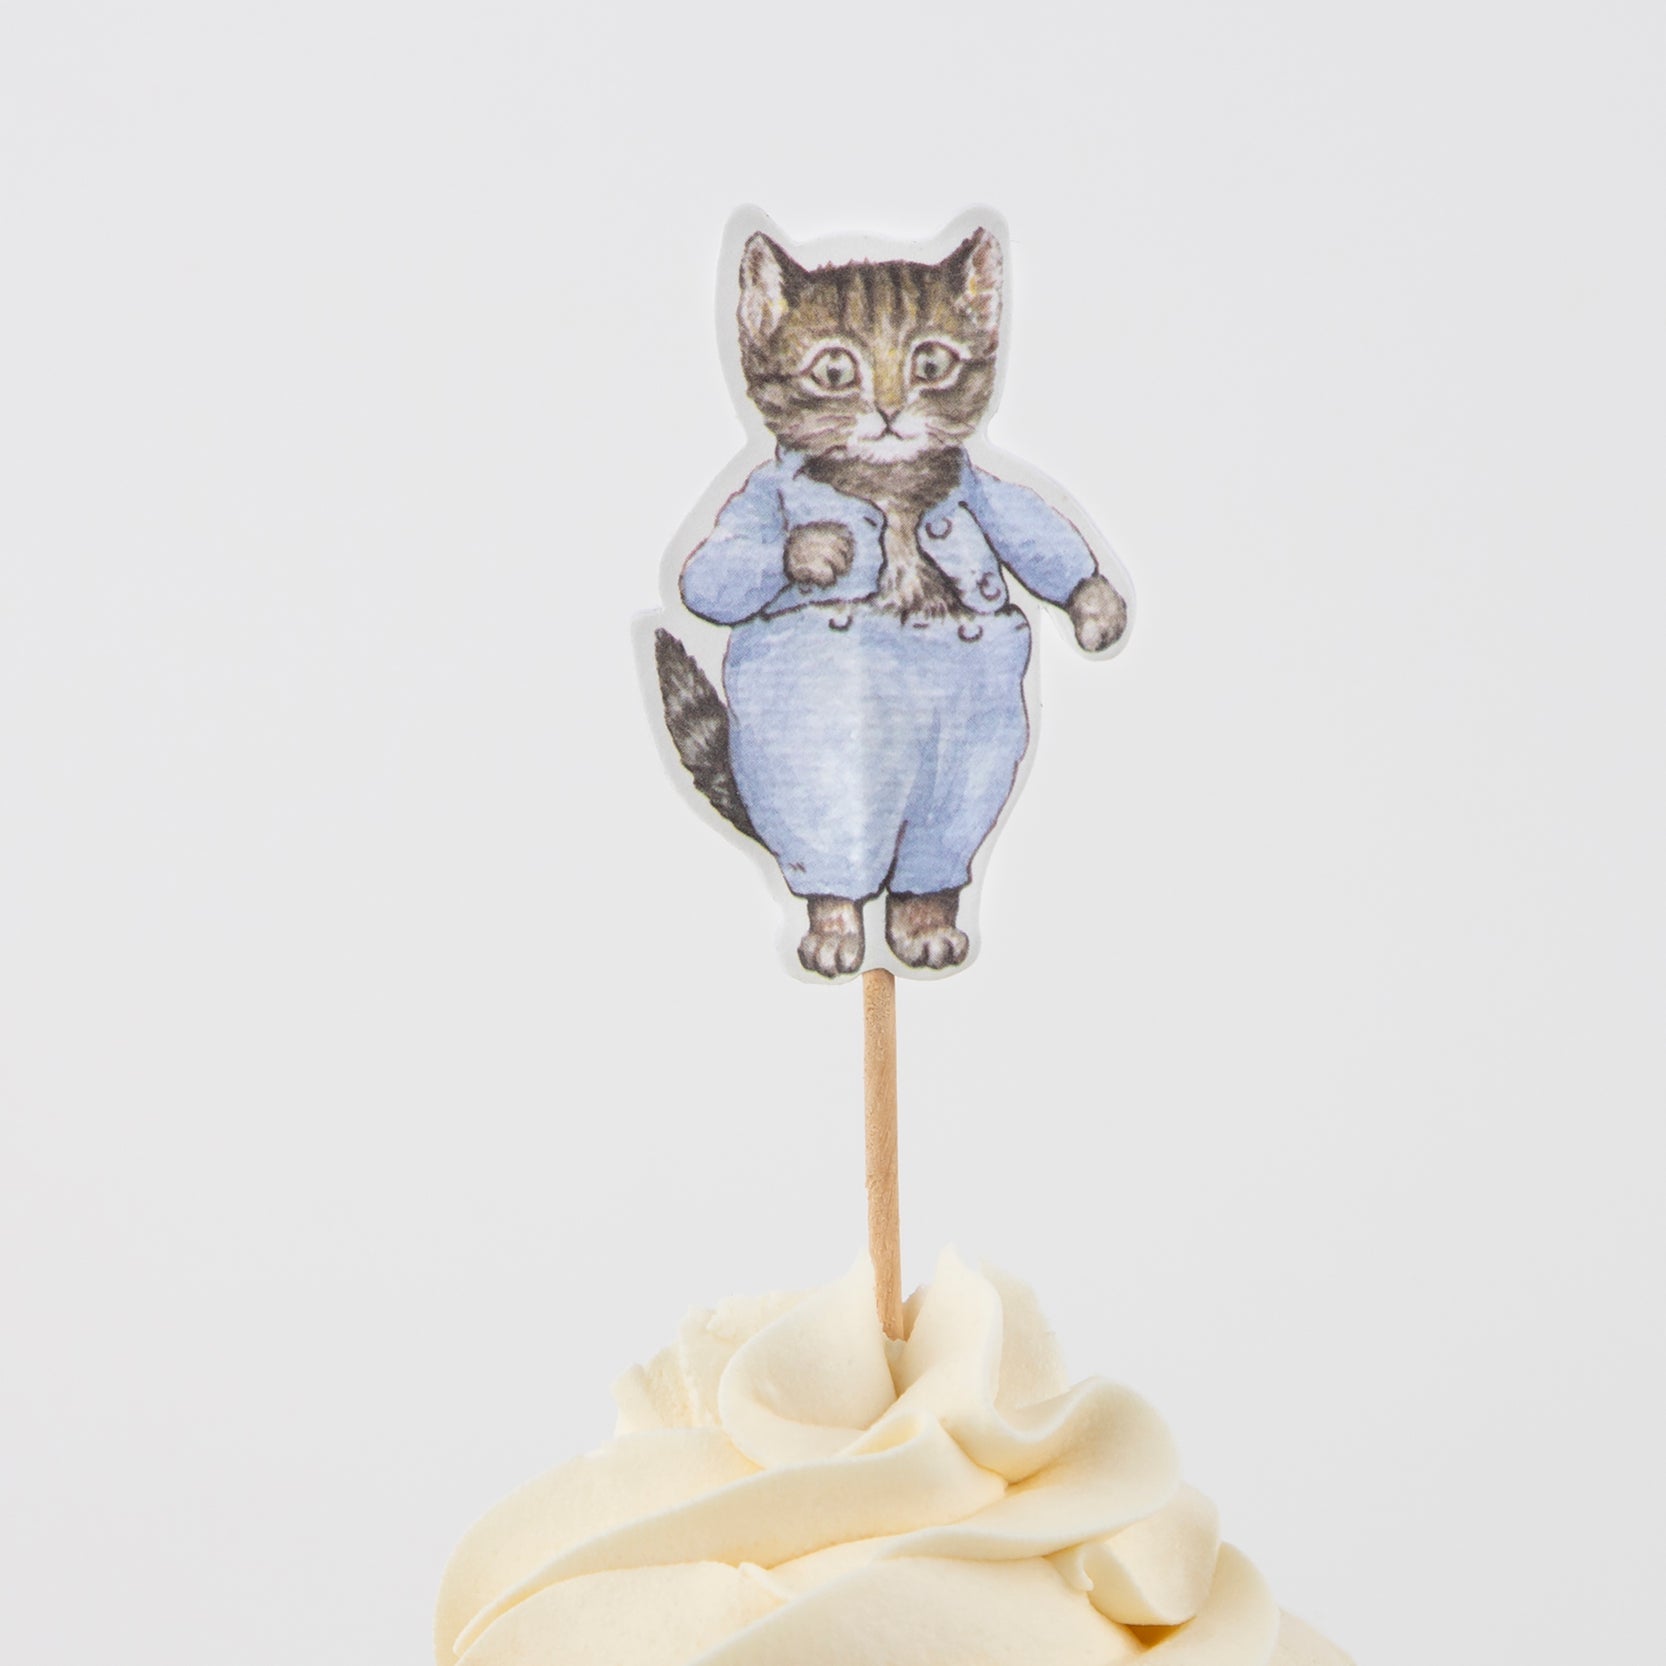 A Peter Rabbit™ In The Garden Cupcake Kit from Meri Meri, with a cat on top, decorated with a cute cupcake topper.